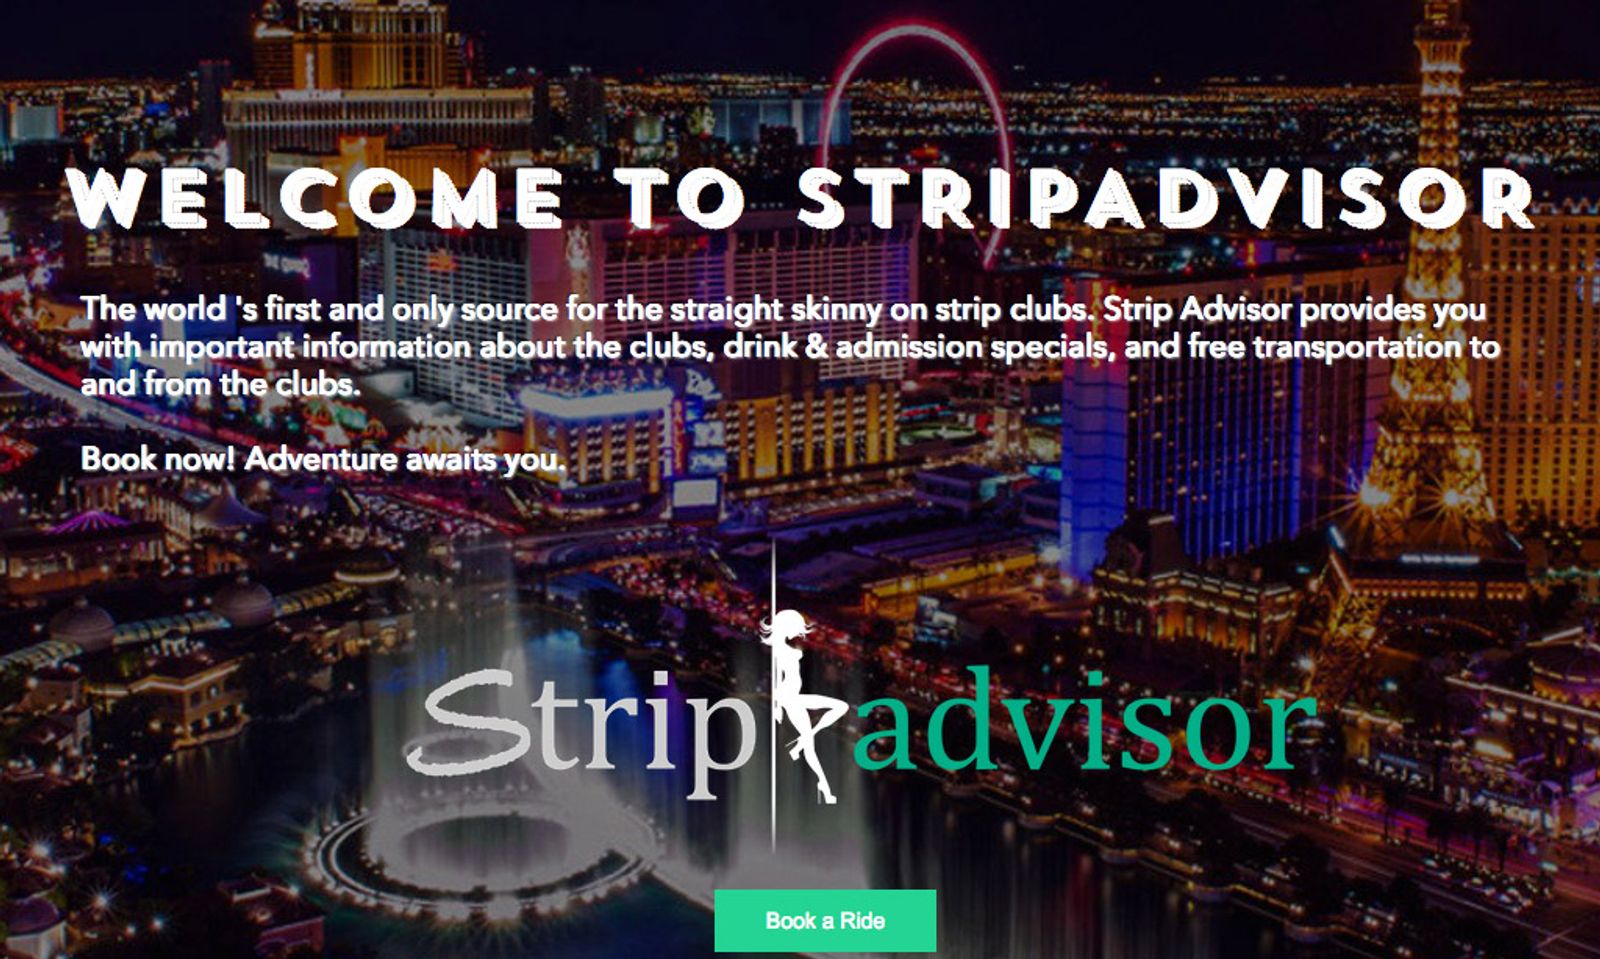 Strip Advisor Launches & Is Looking For Global Brand Ambassador